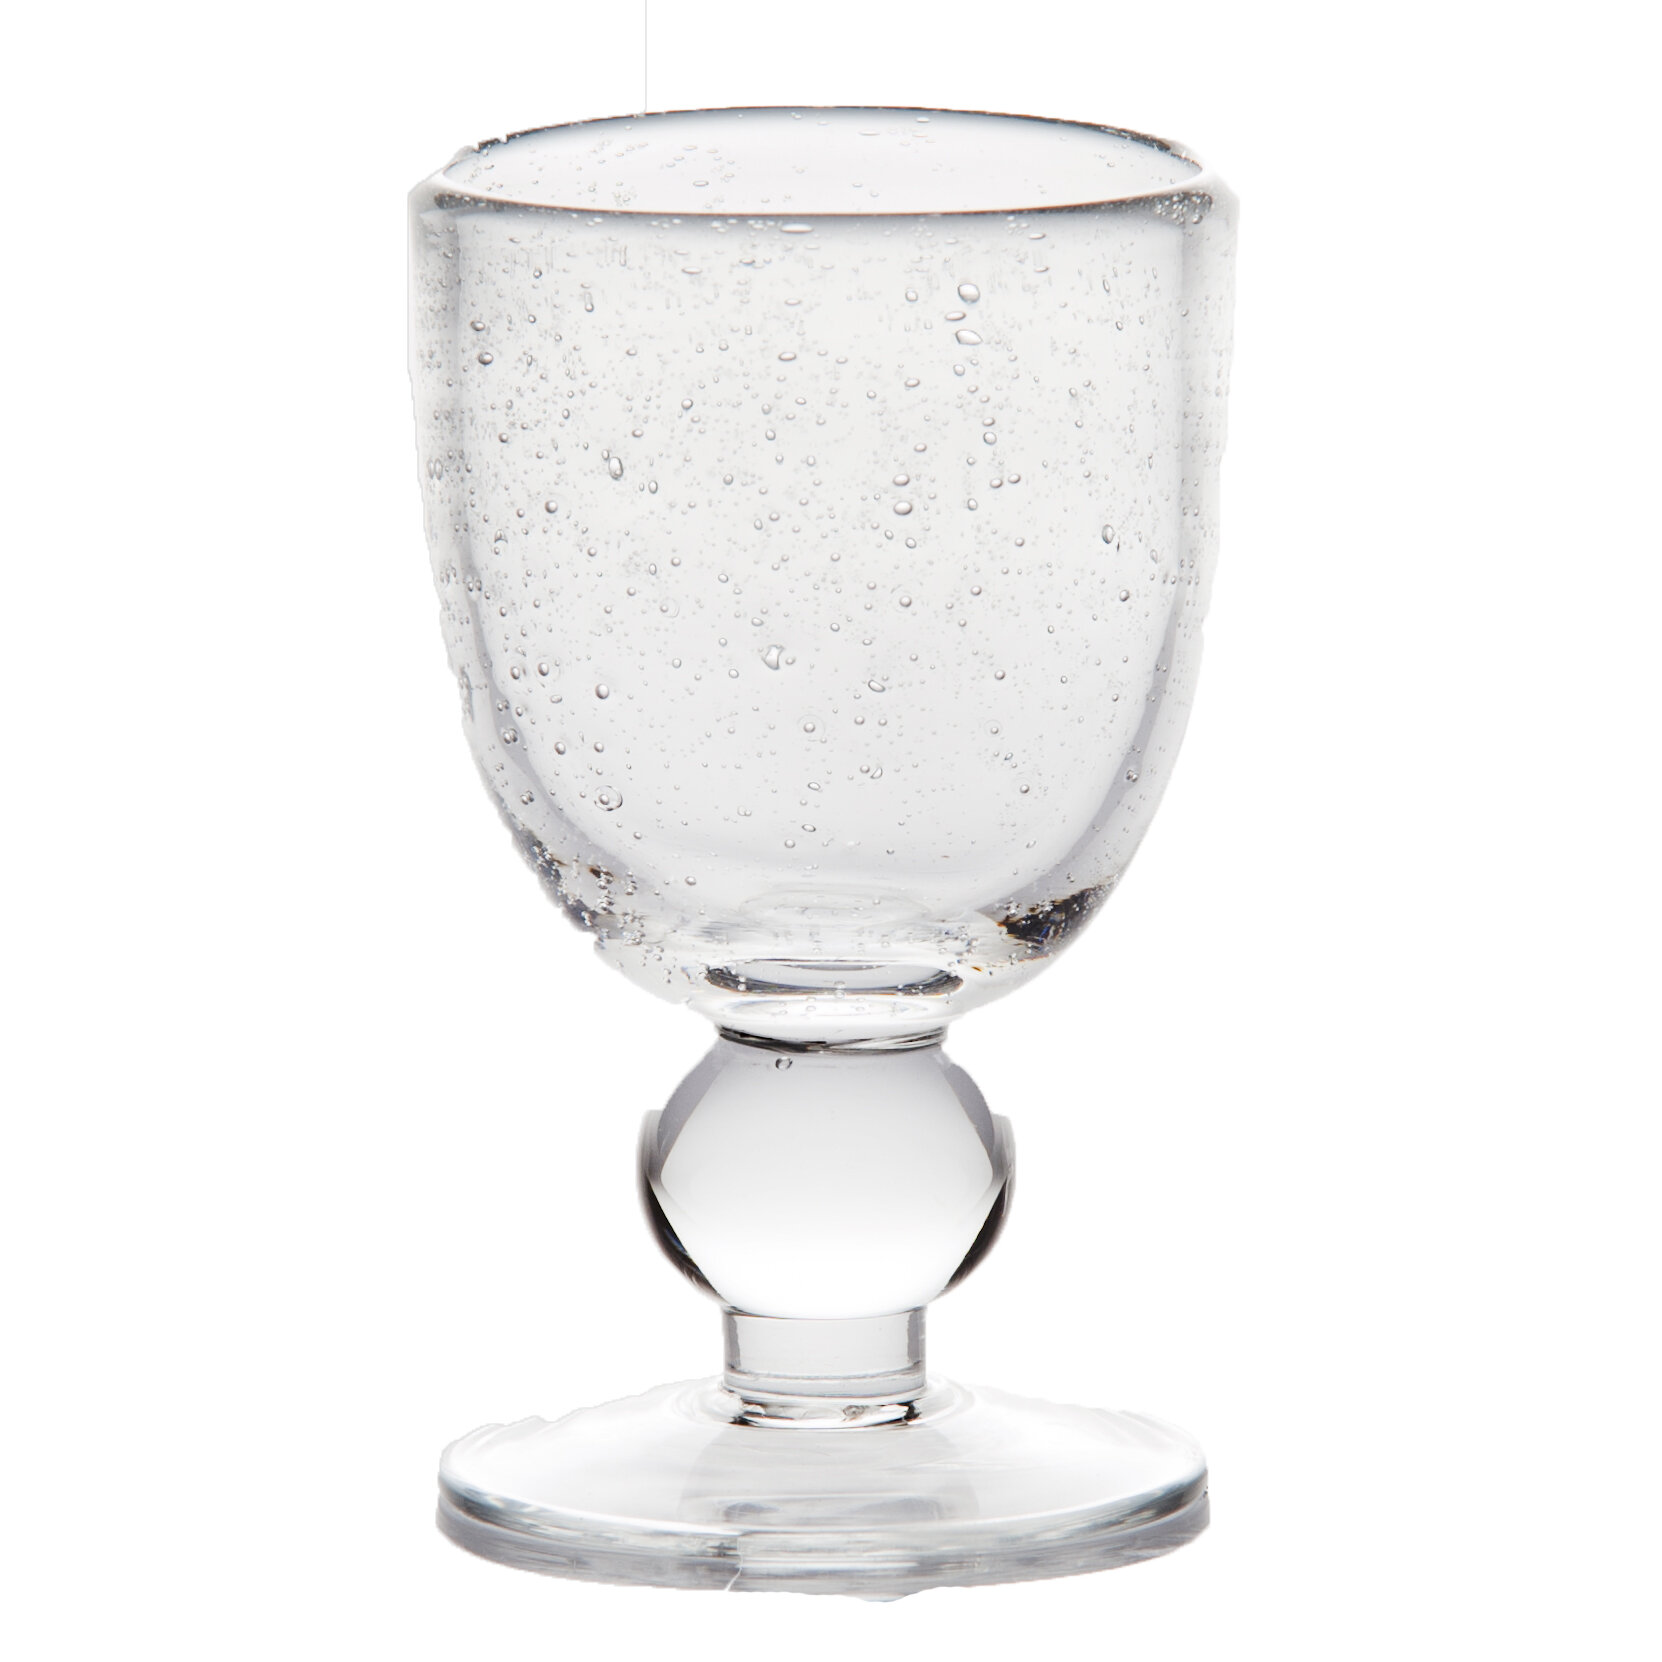 Abigails 726021 Frosted Wine Glass, Set of 4, White